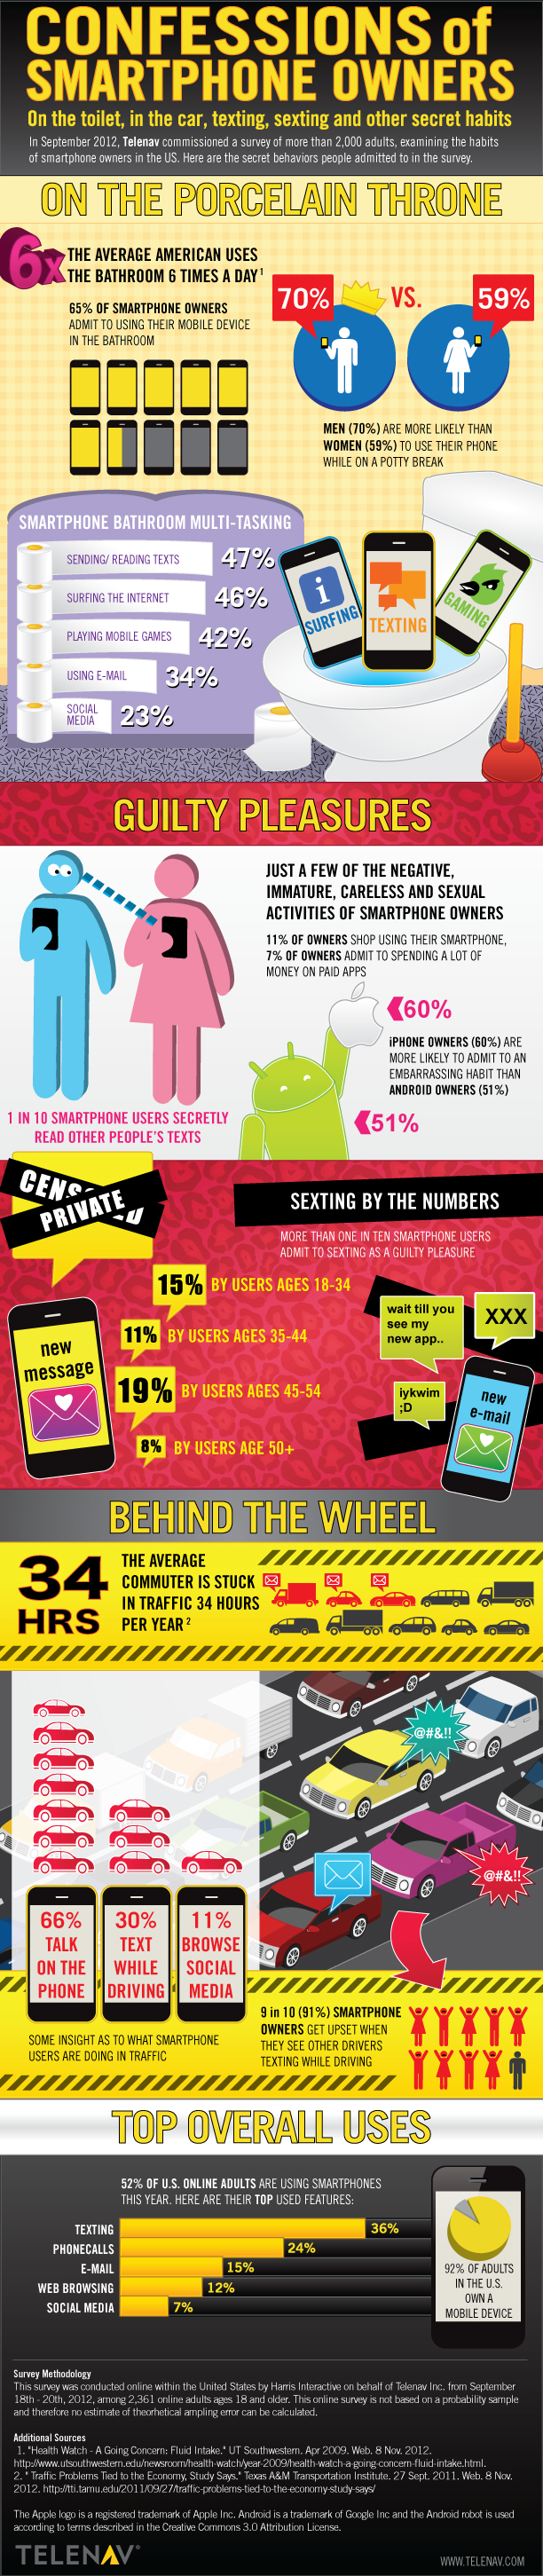 INFOGRAPHIC: Confessions of Smartphone Owners